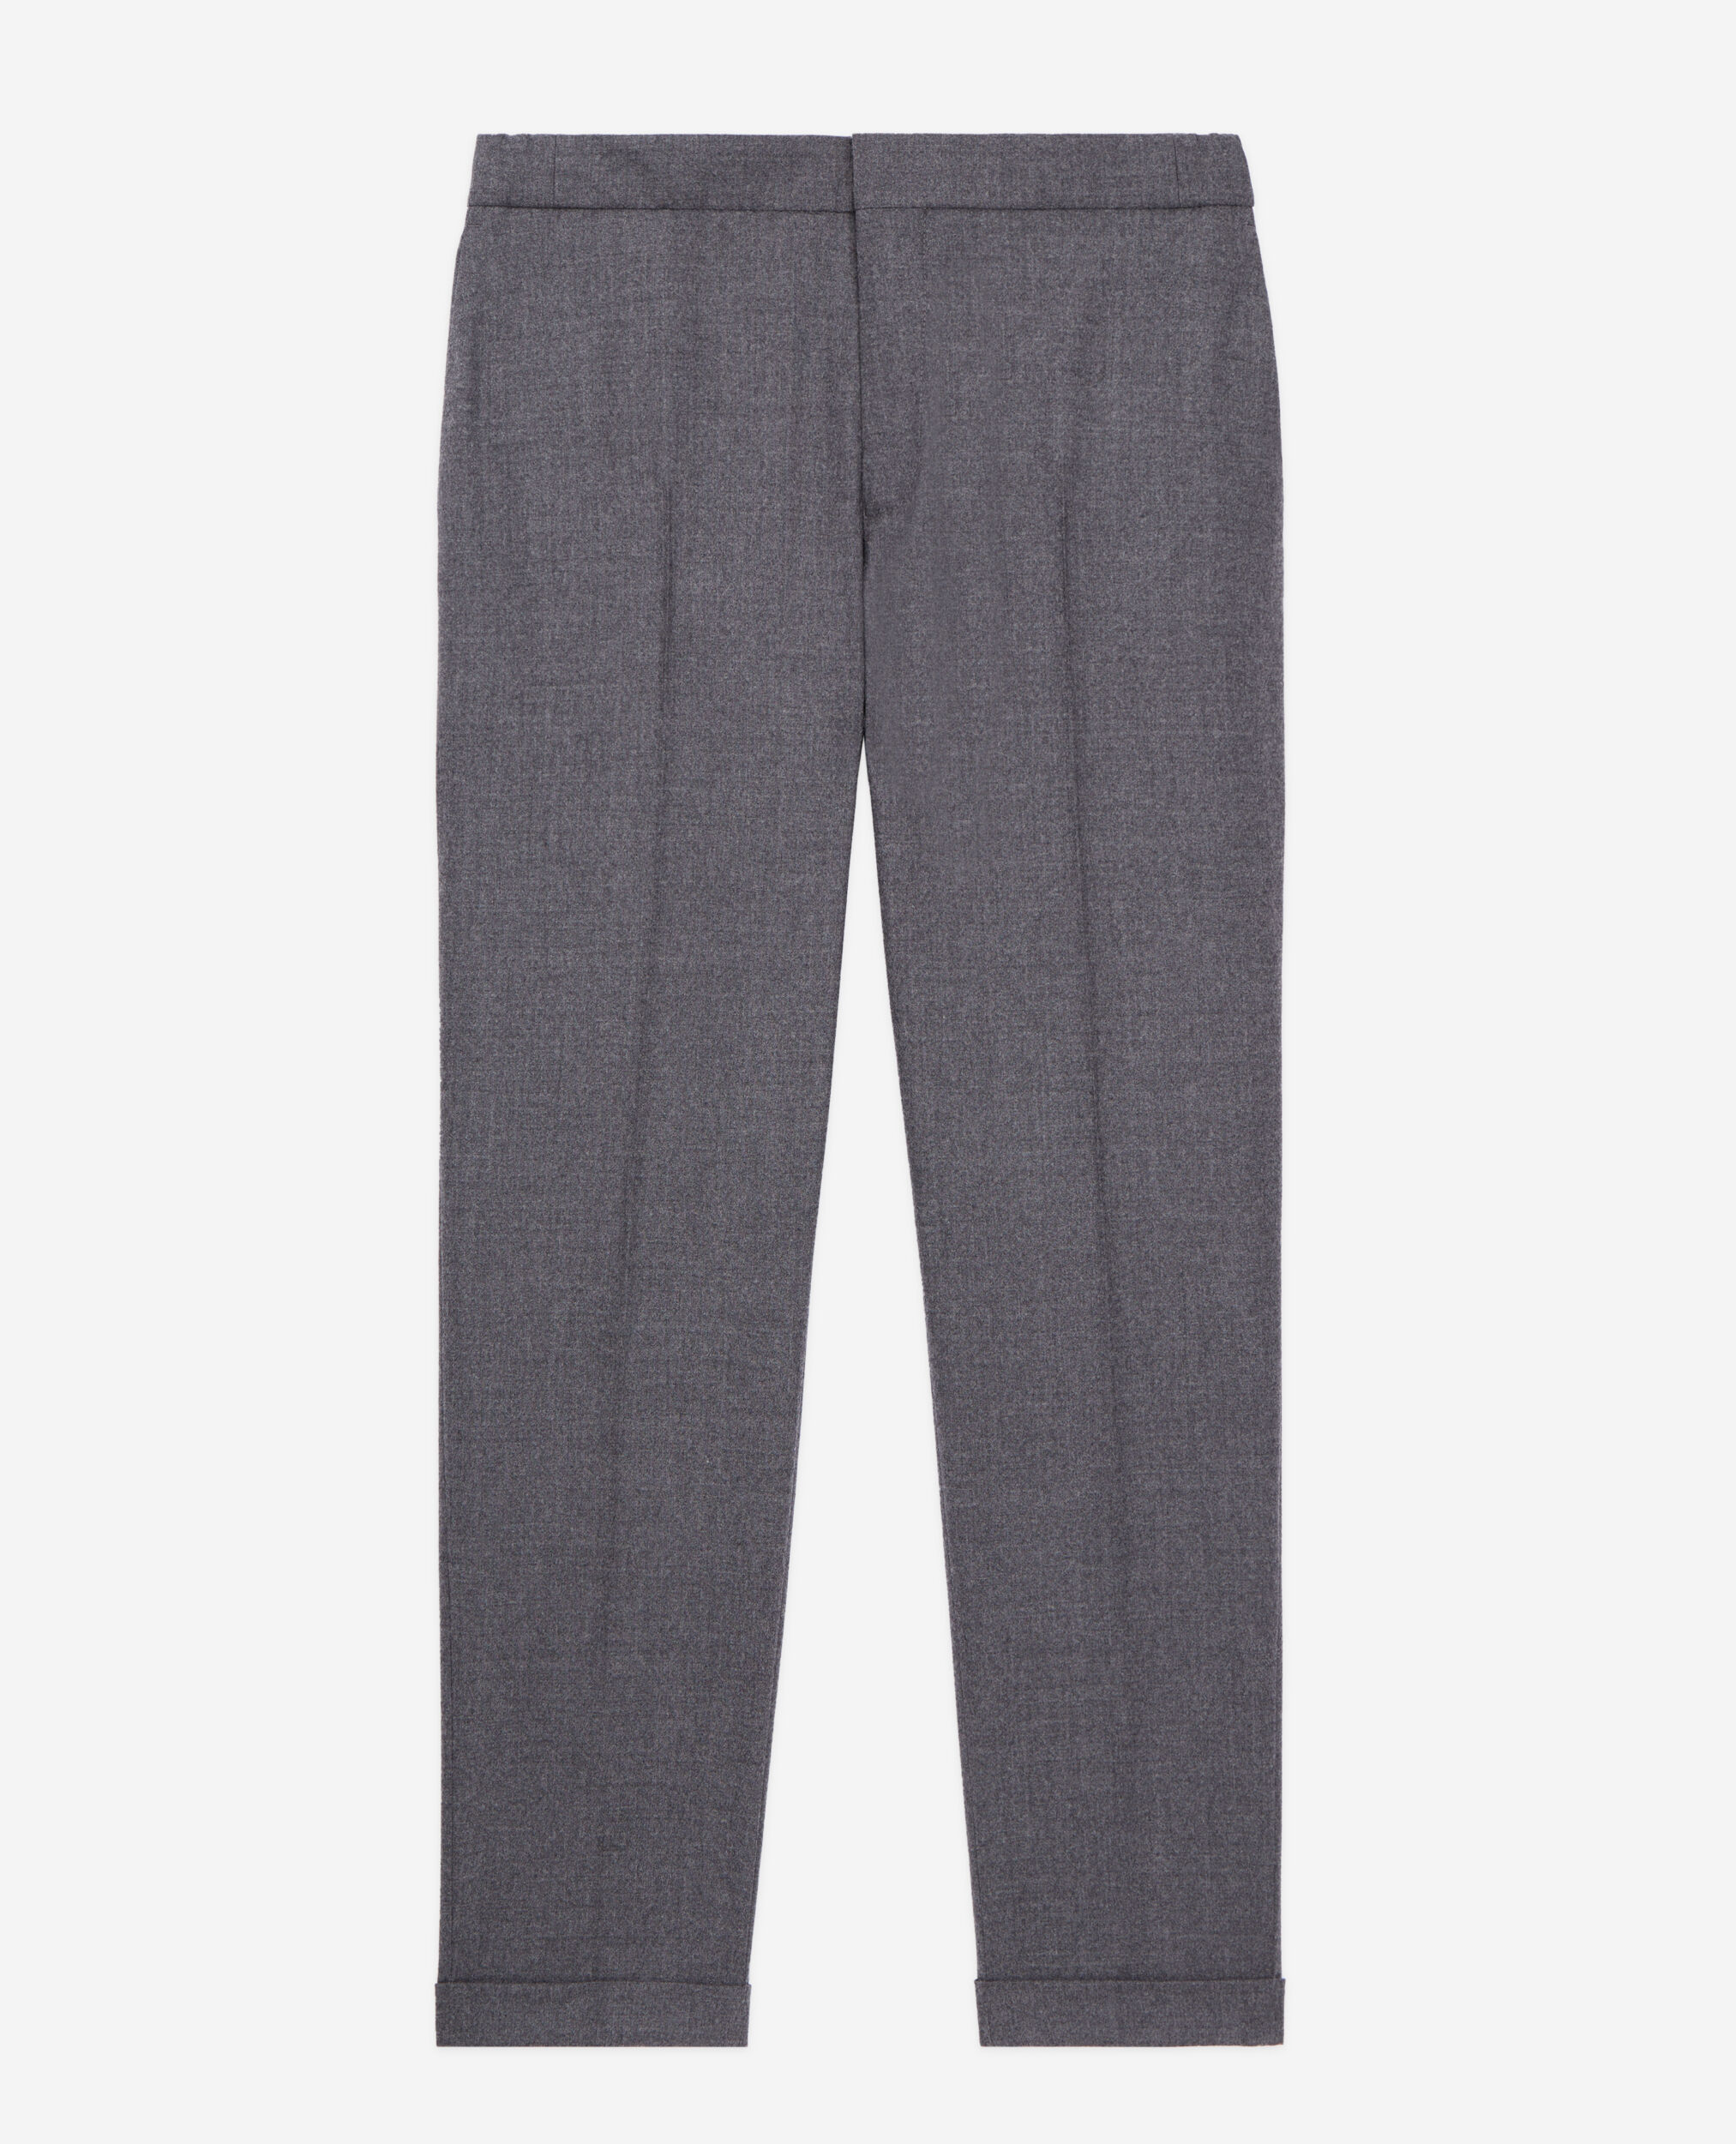 Graue Hose aus Flanell, GREY, hi-res image number null